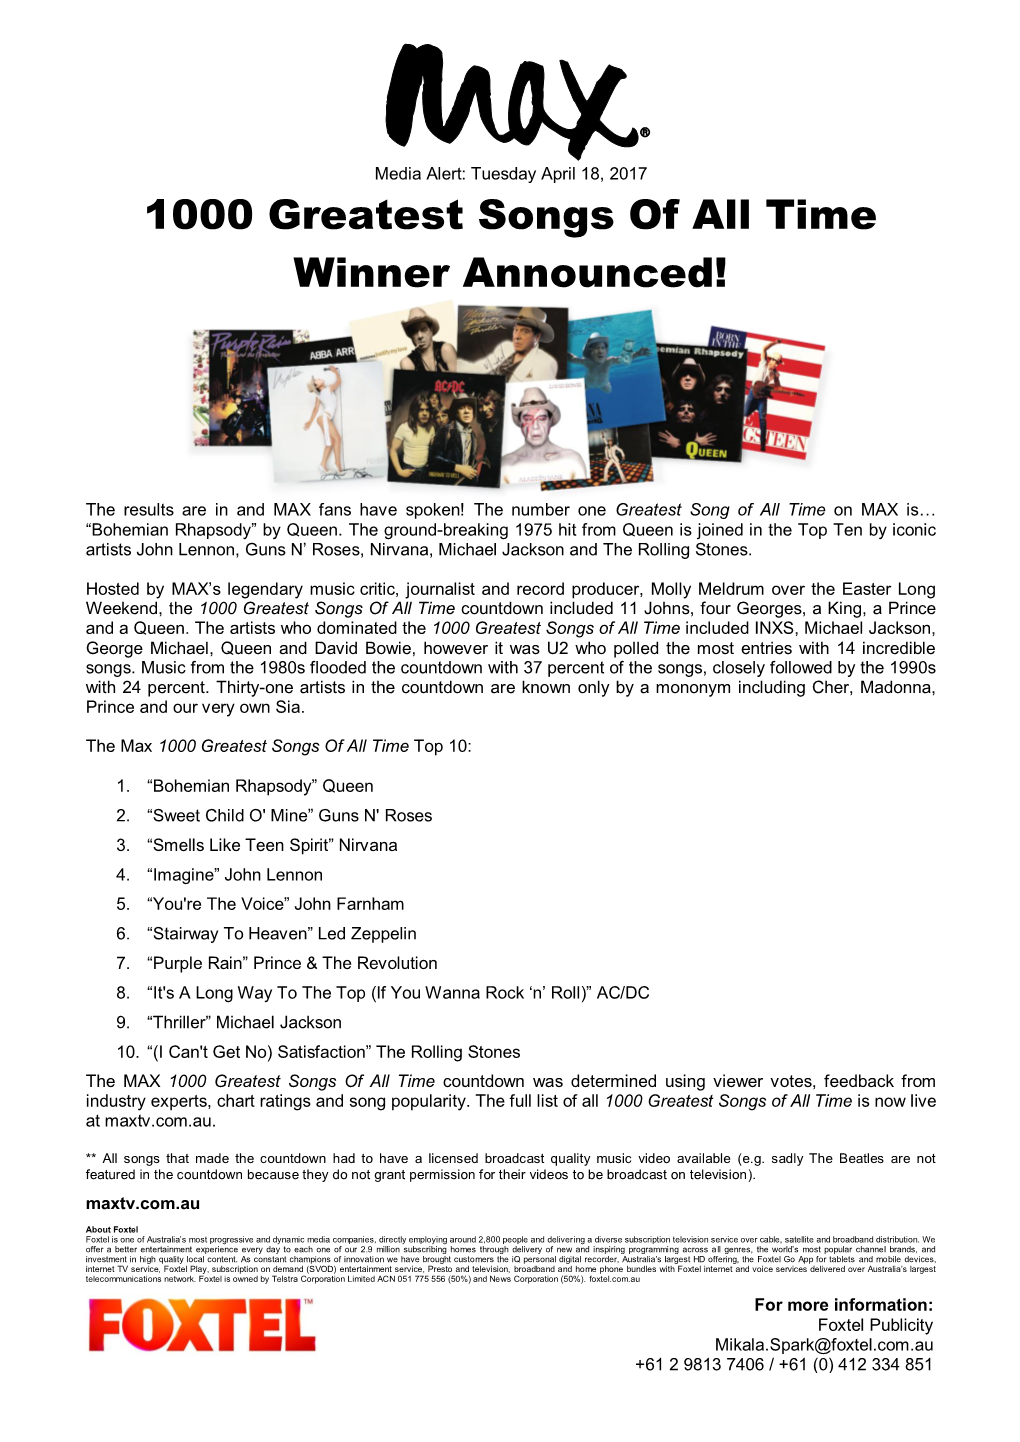 1000 Greatest Songs of All Time Winner Announced!